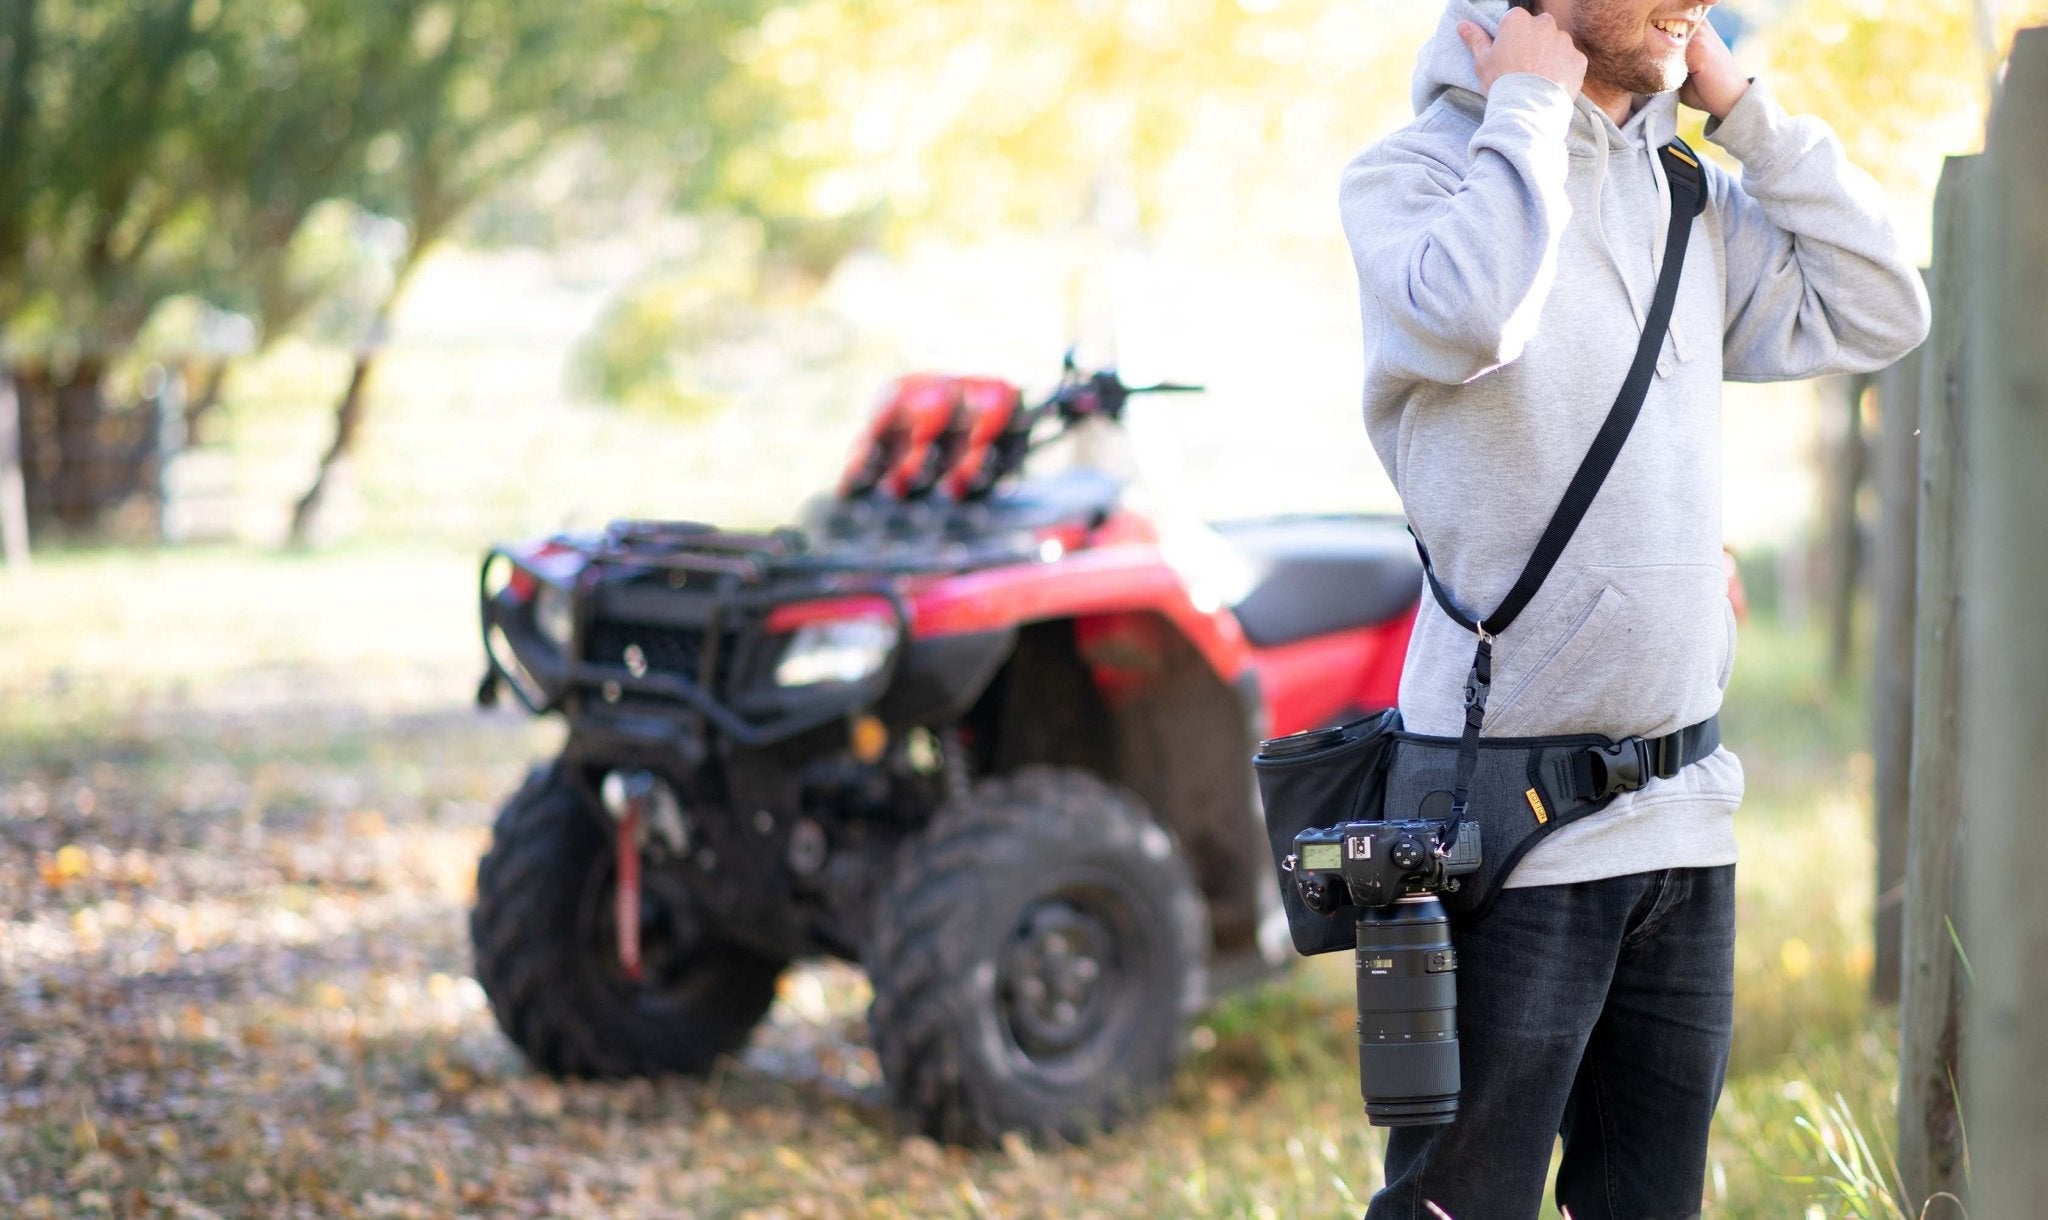 Men's Axis Feature - Cotton Camera Carrying Systems